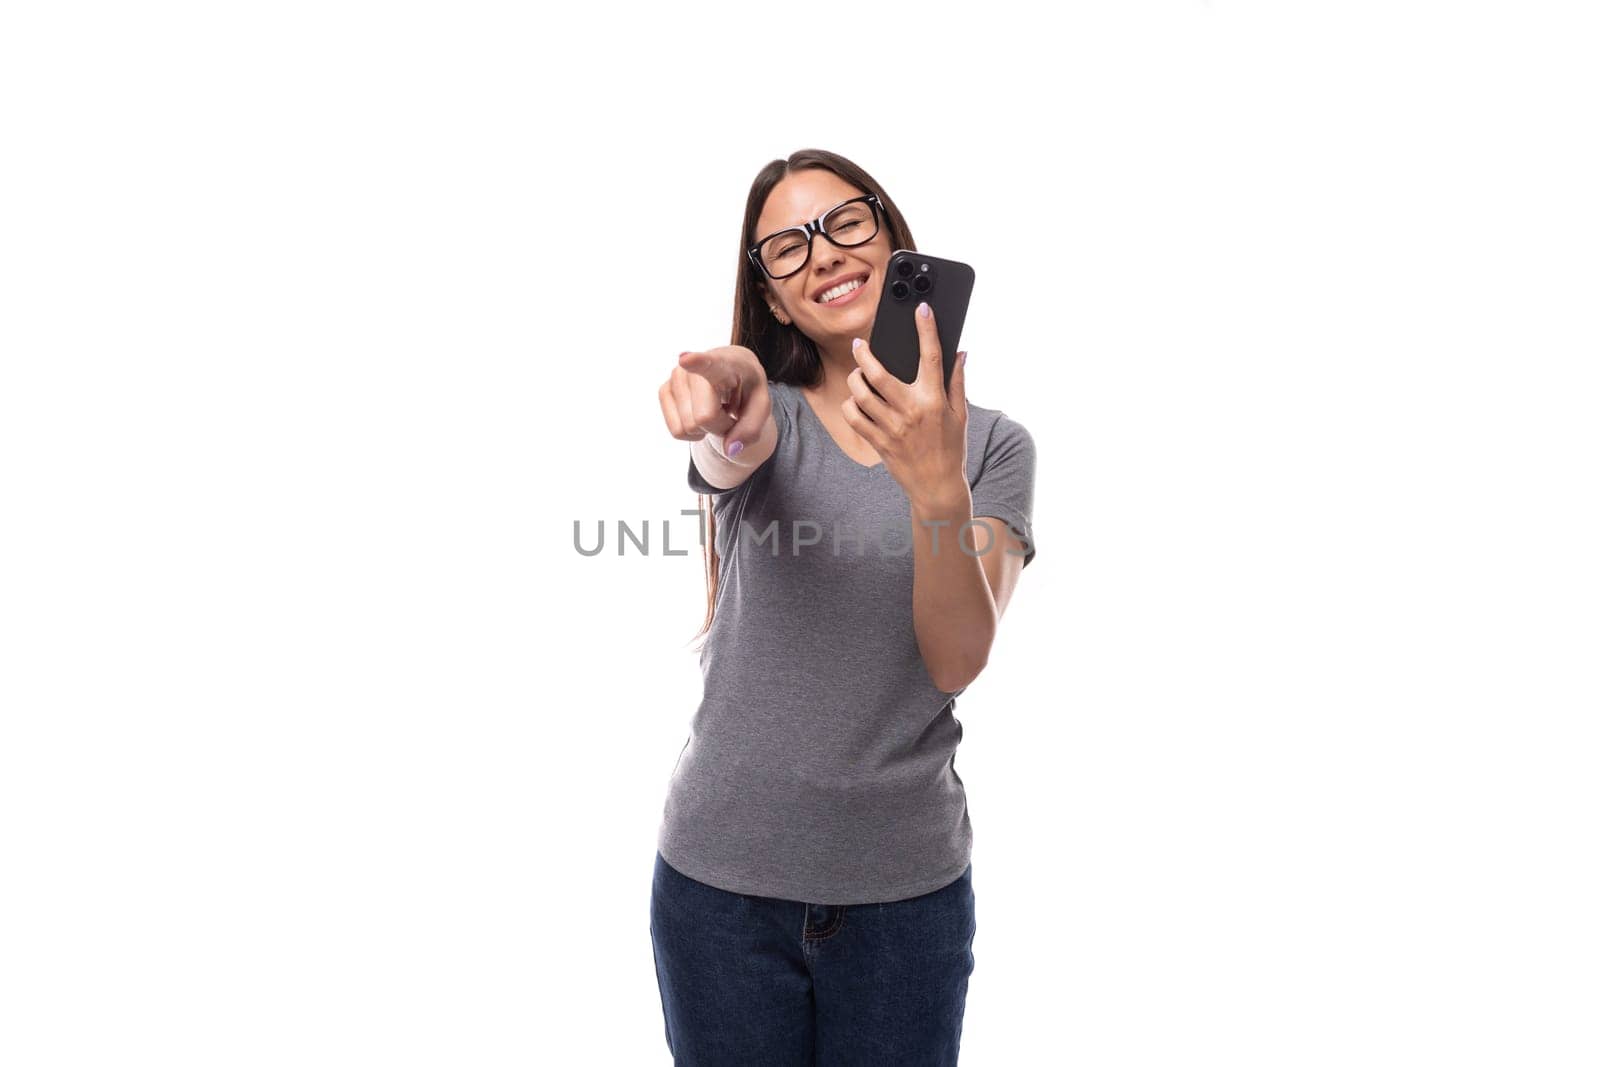 young promoter woman in glasses dressed in a gray t-shirt uses a smartphone on a white background with copy space.